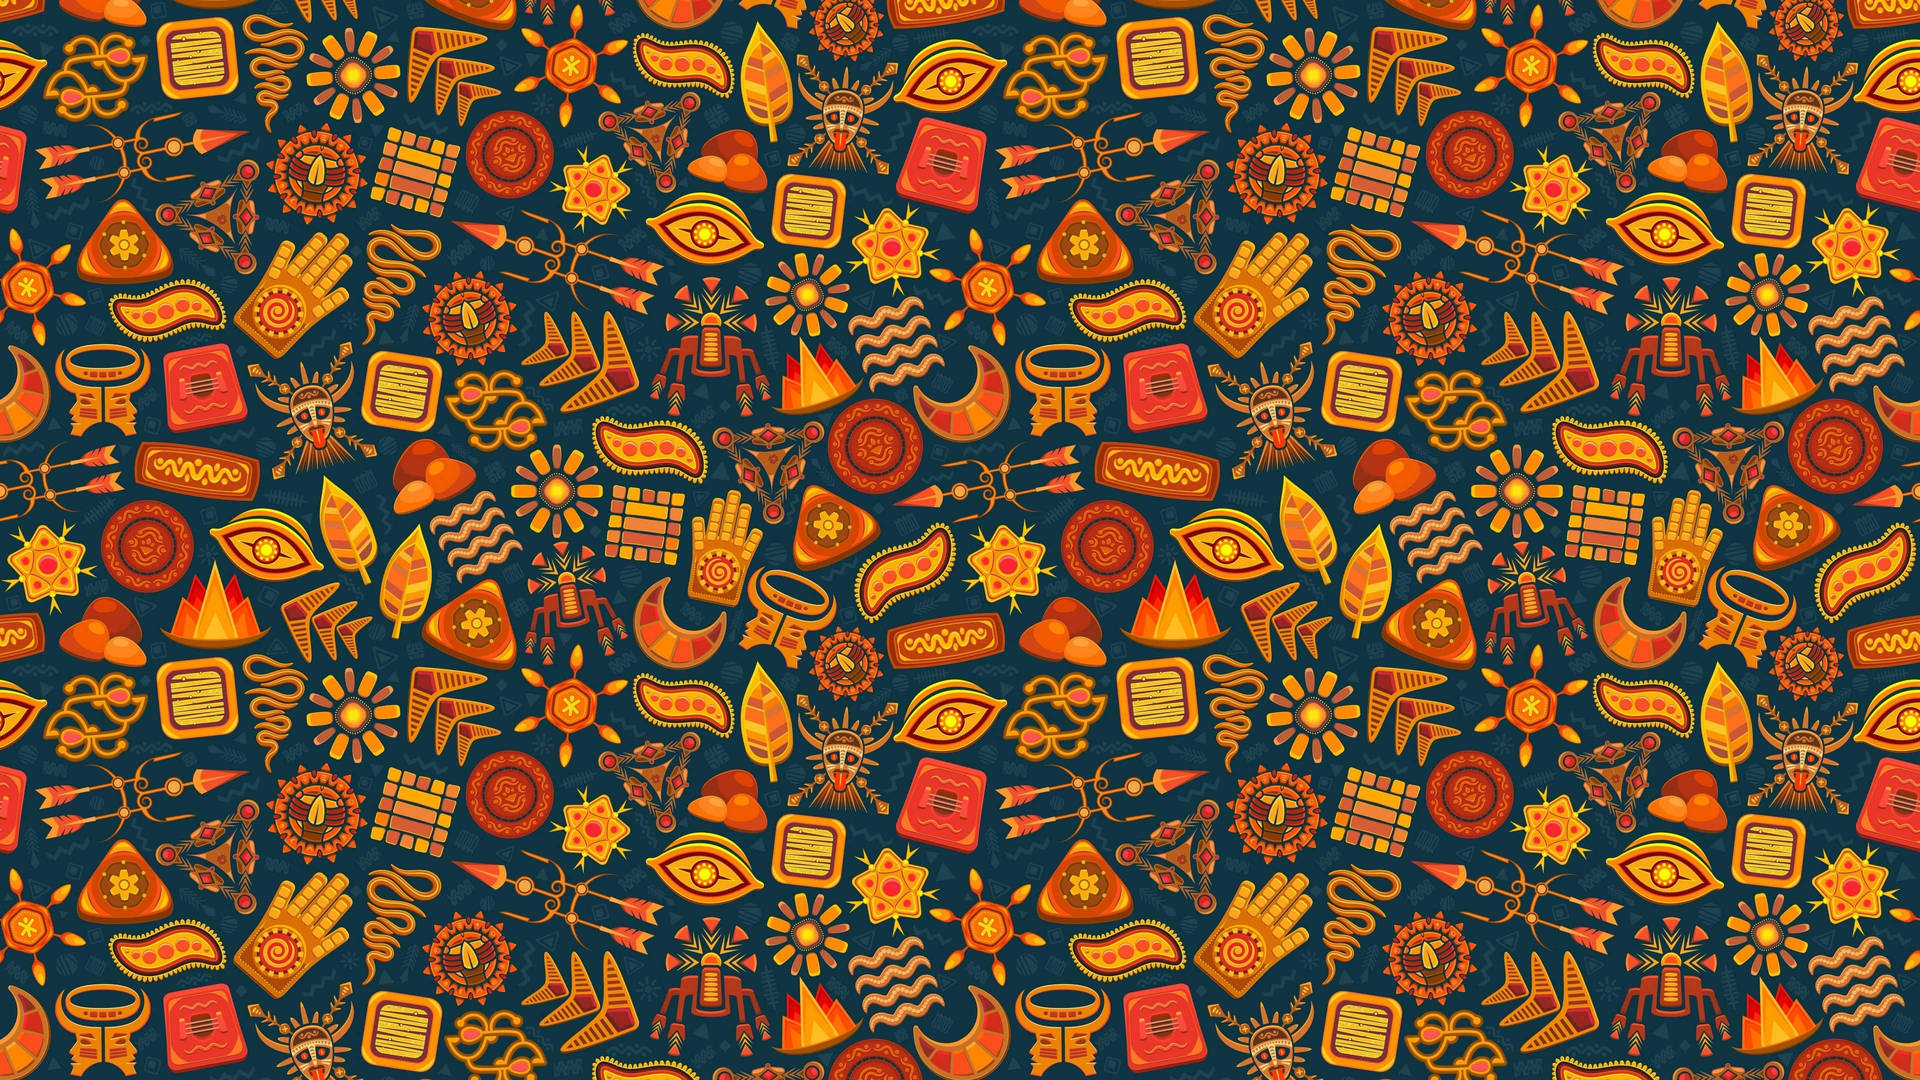 Set Of Vibrantly-colored Aztec-inspired Icons And Patterns For Designs